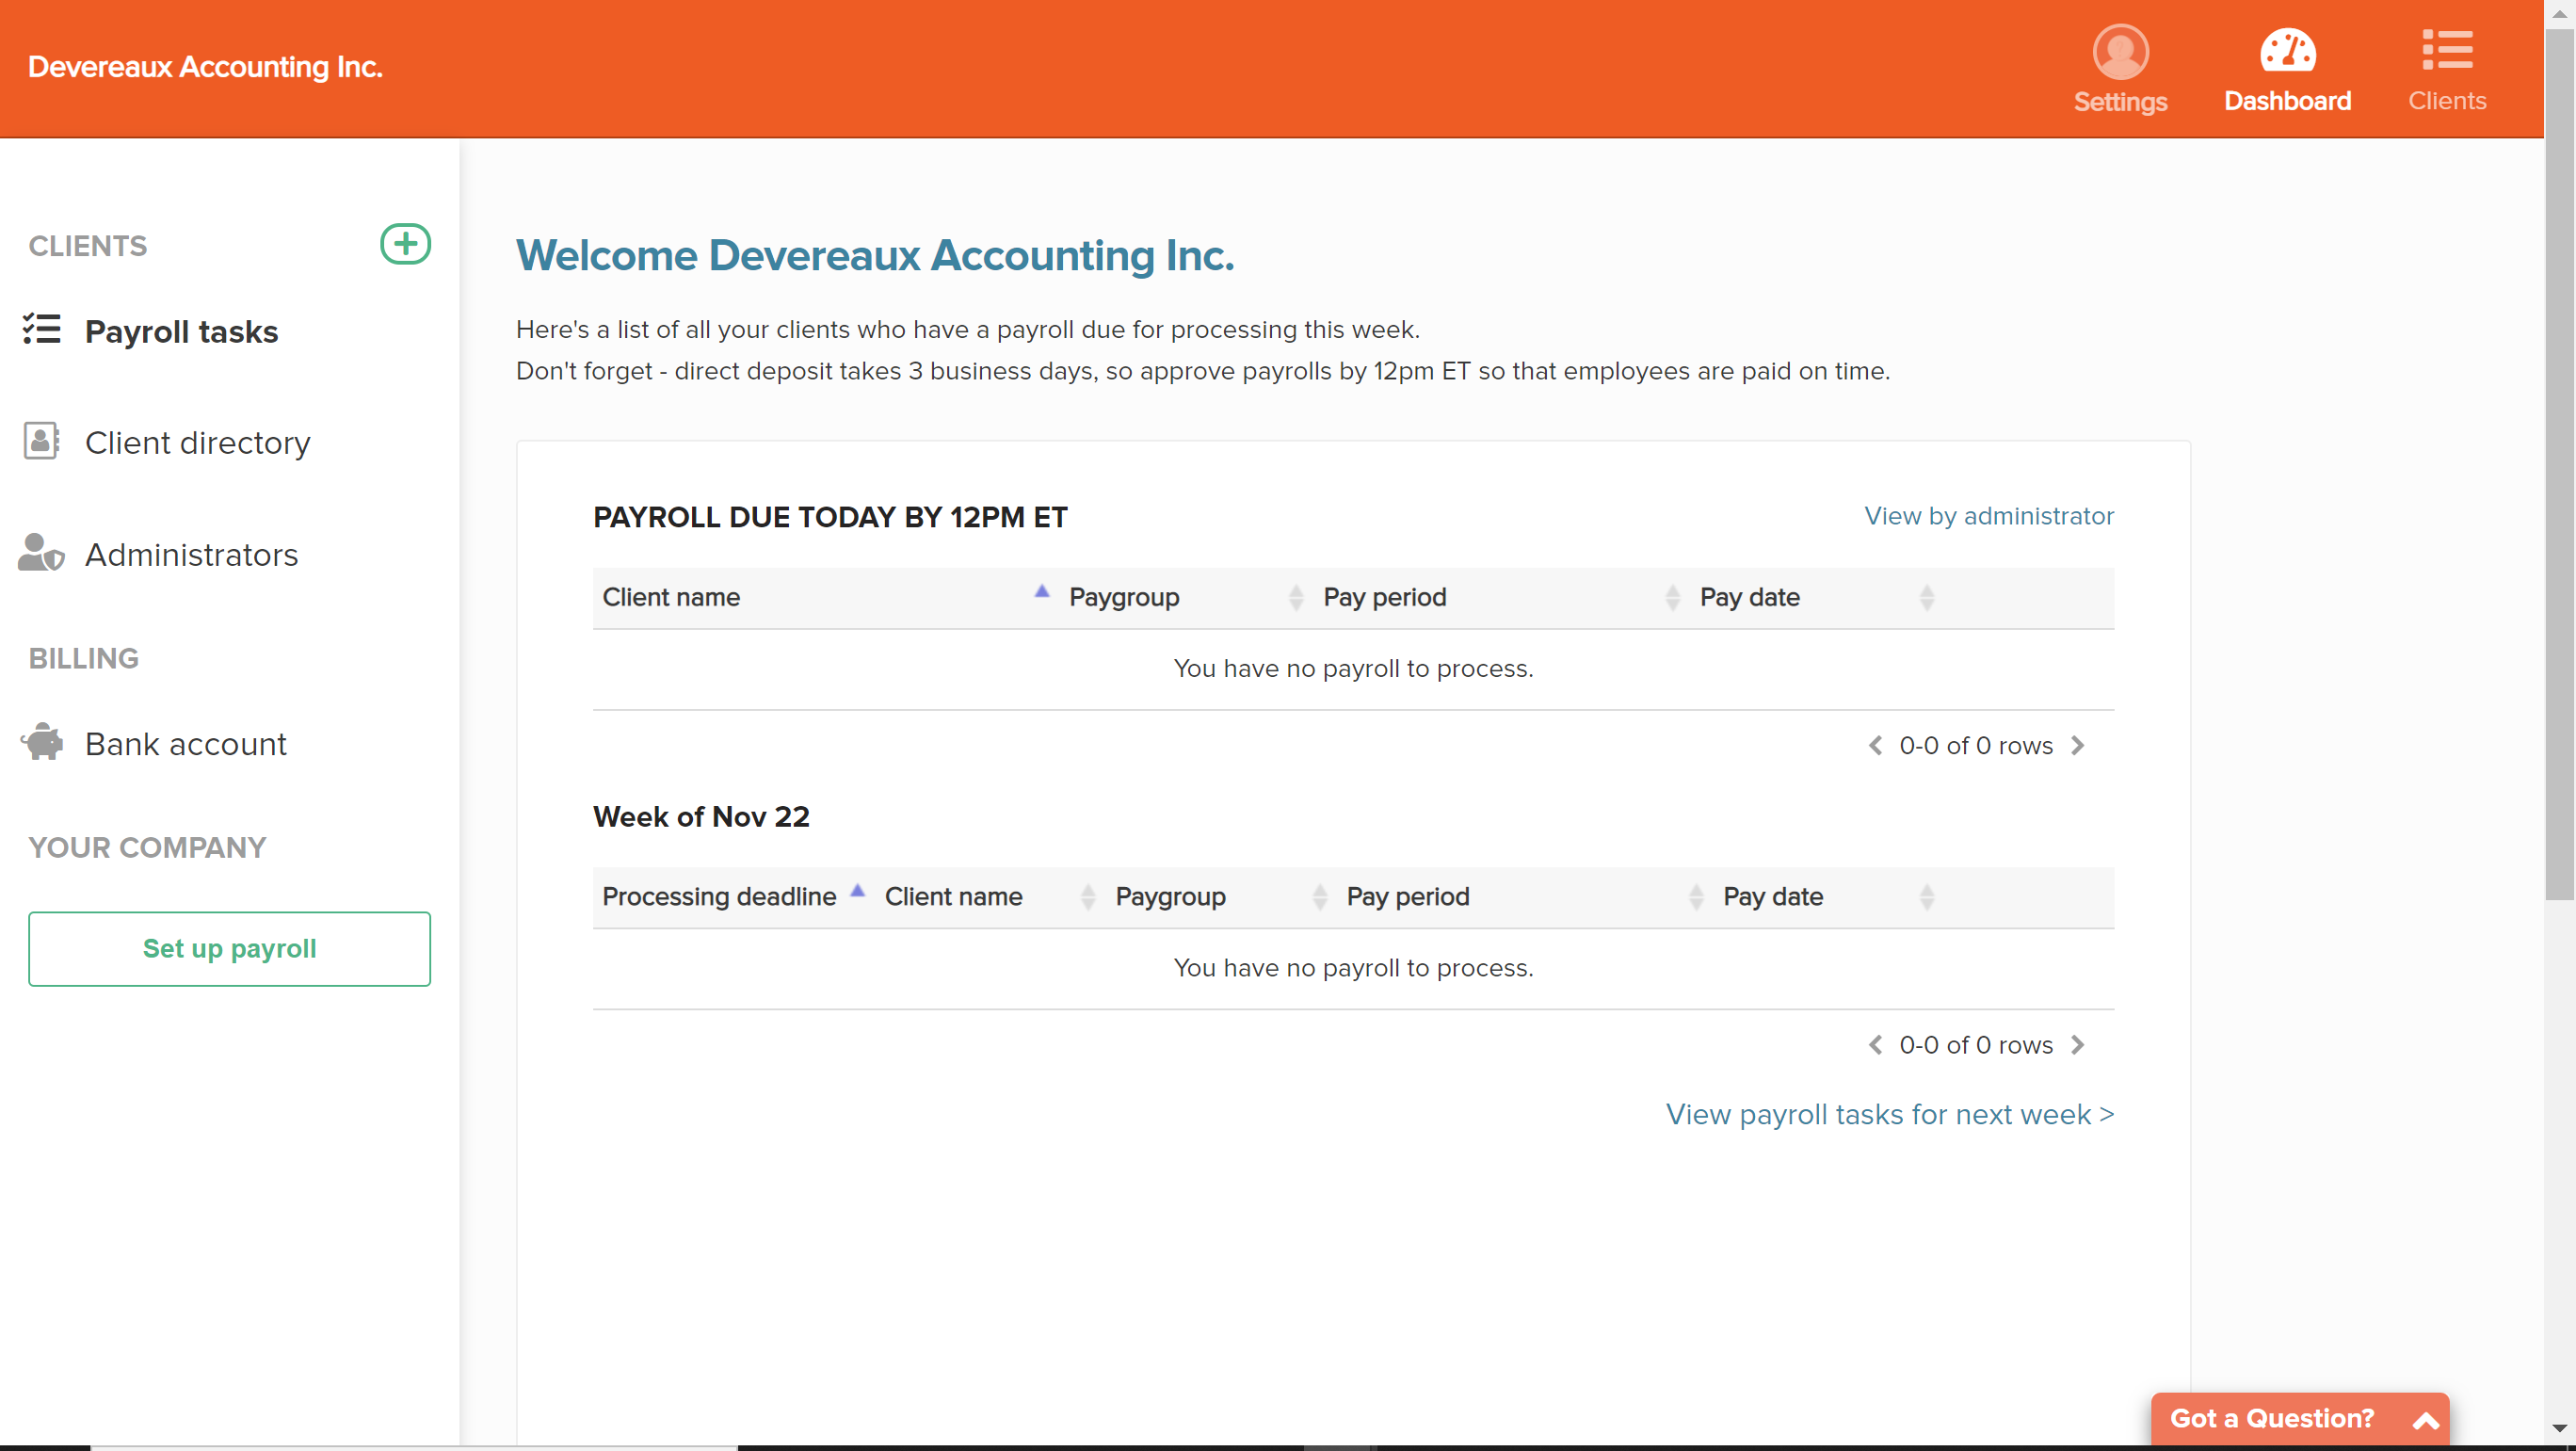 Access the accounting dashboard | Easy-to-use and intuitive payroll software. This dashboard can only be accessed by accountants and bookkeepers. Learn more about our partner program: https://wagepoint.com/ca/partners